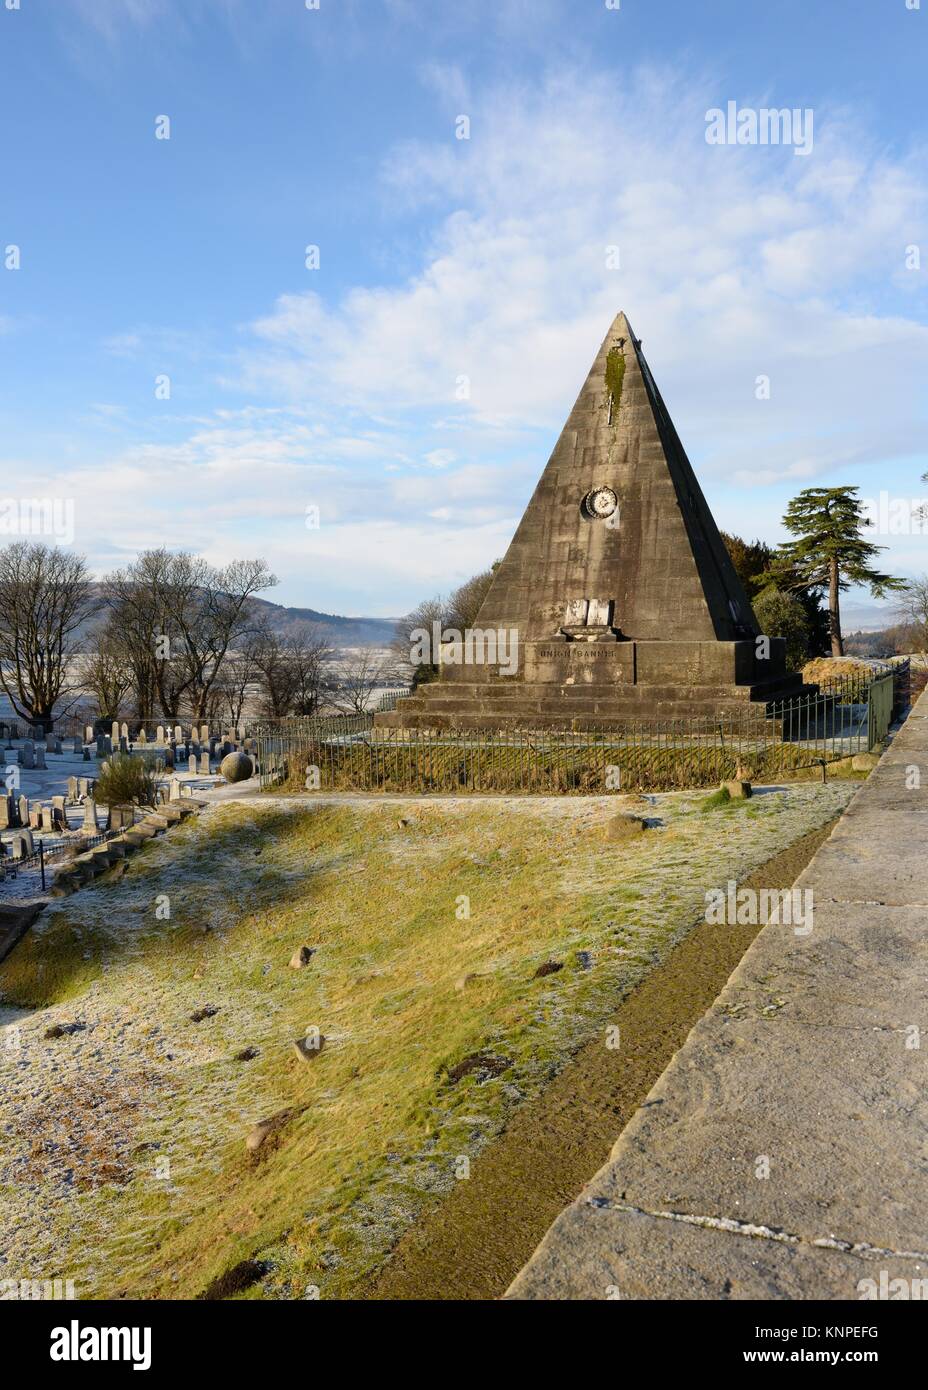 The Star Pyramid is a stone memorial to the martyrs of the Scottish Reformation and Covenanting era located in Stirling, Scotland. Stock Photo